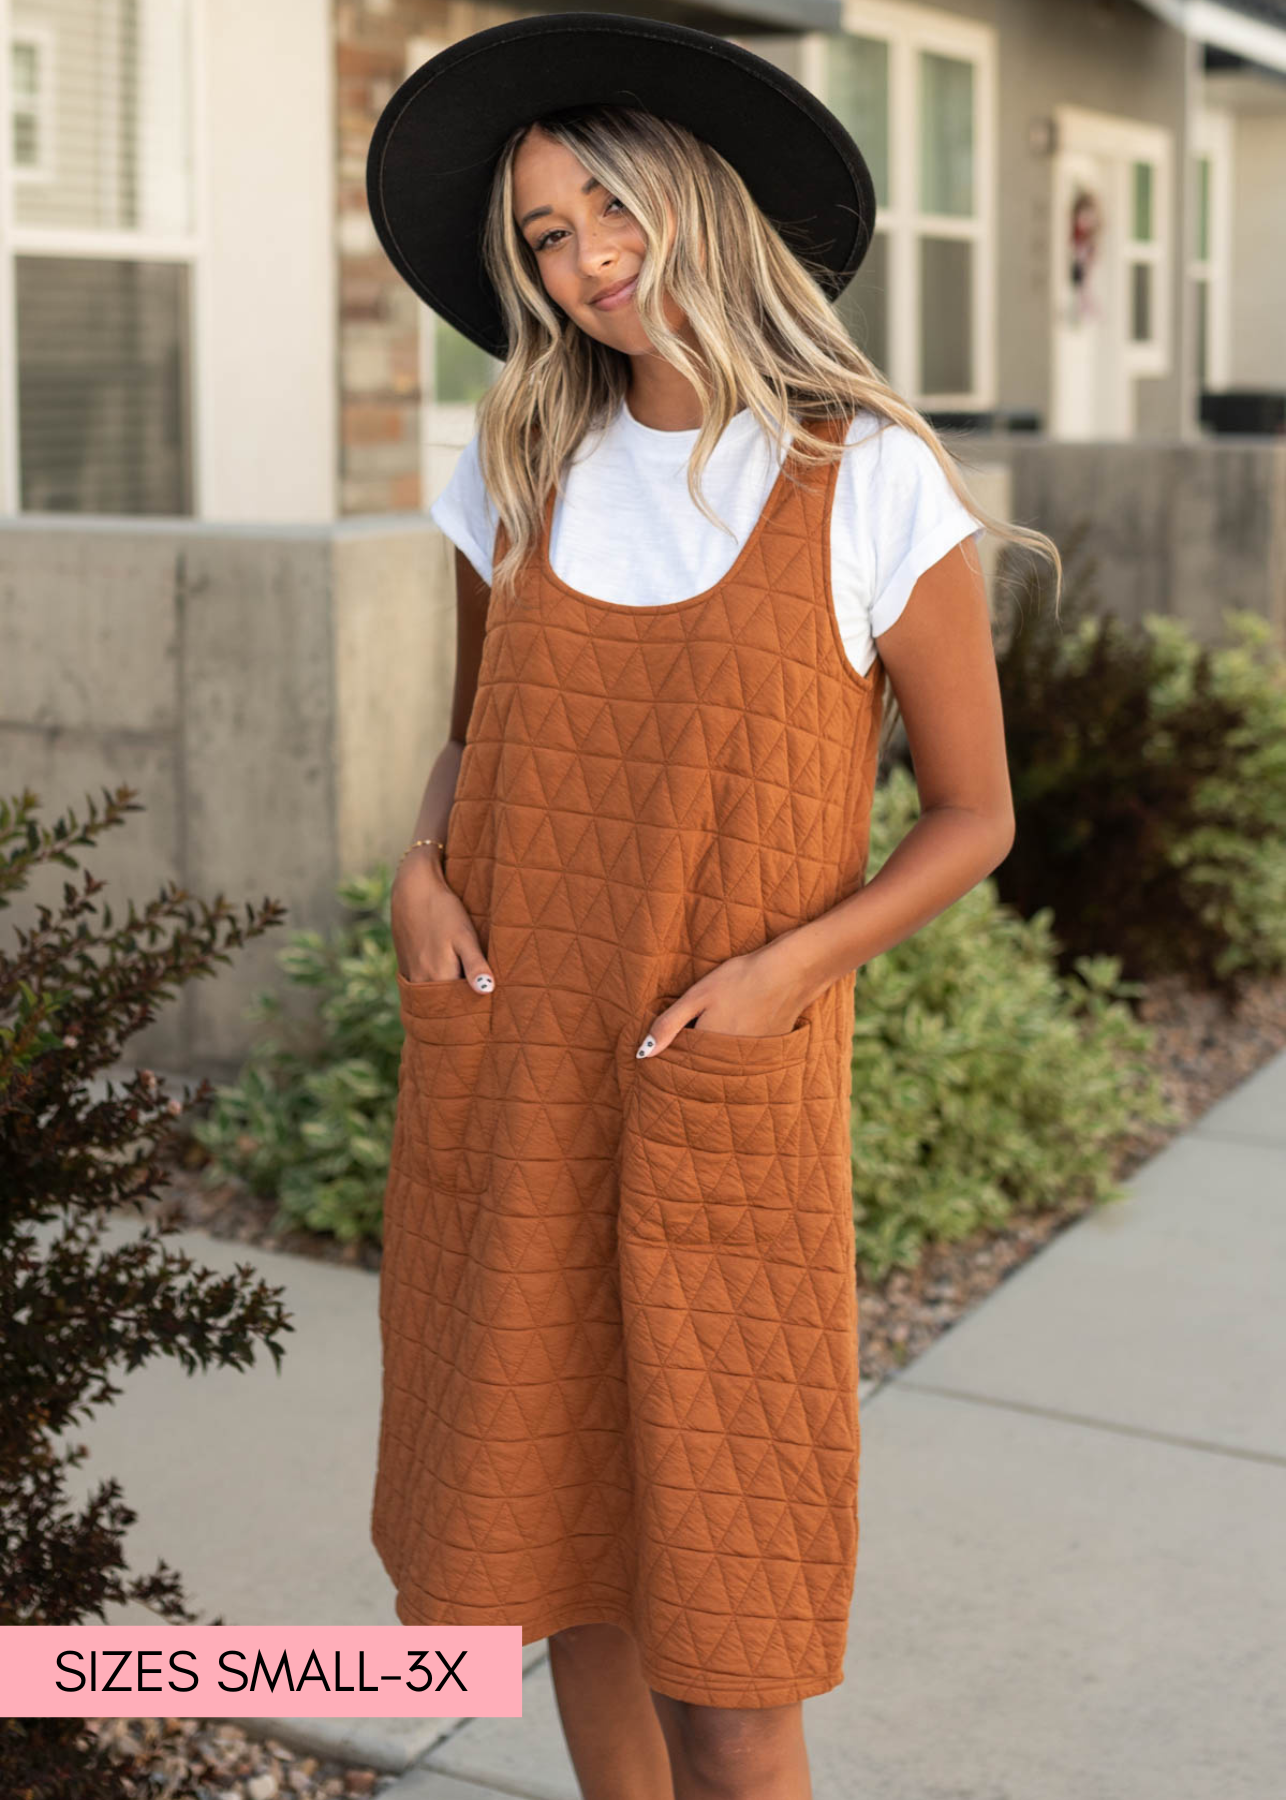 Cinnamon dress with pockets and quilted fabric